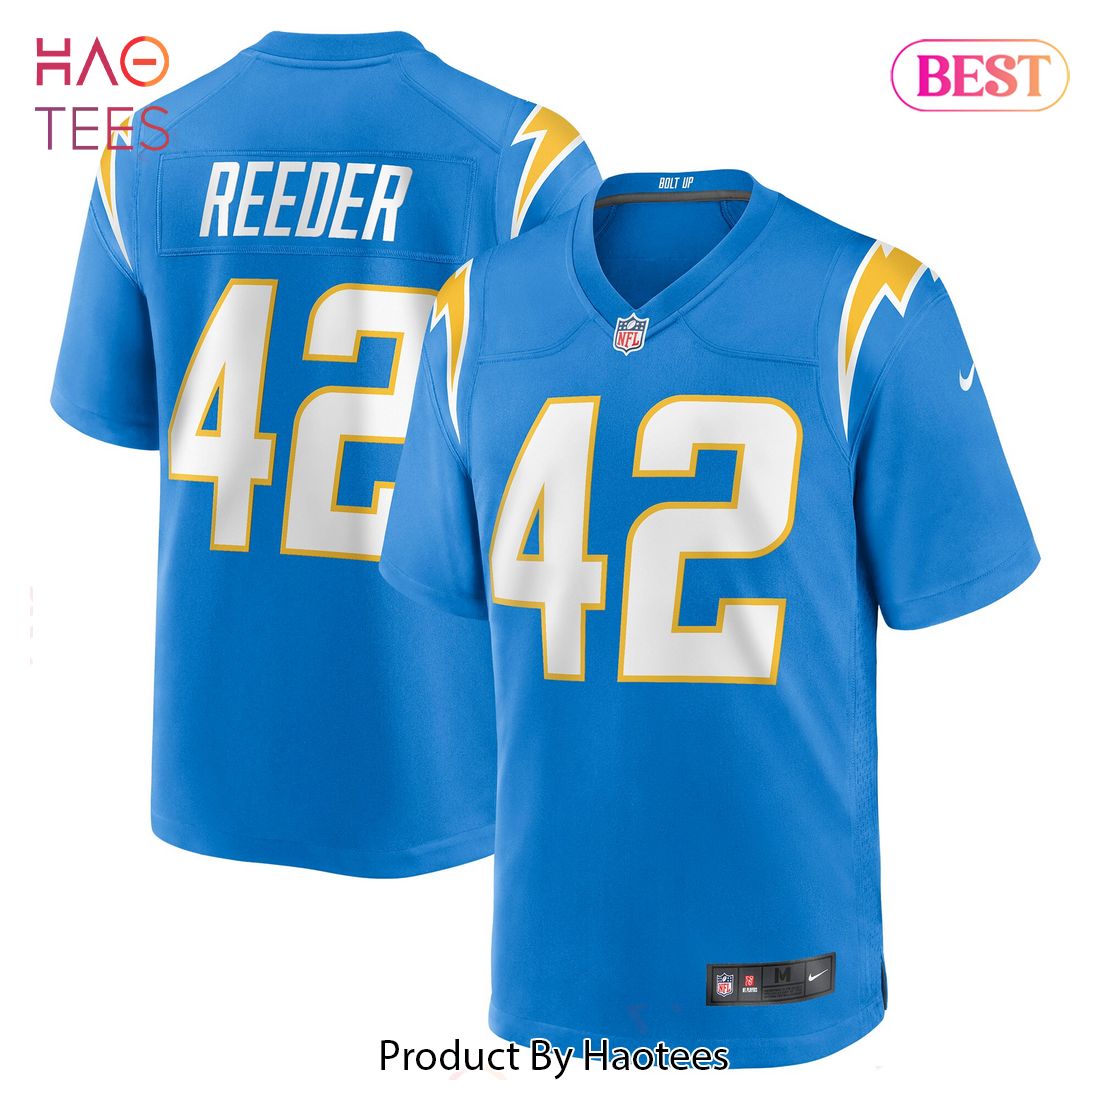 Troy Reeder Los Angeles Chargers Nike Game Jersey Powder Blue